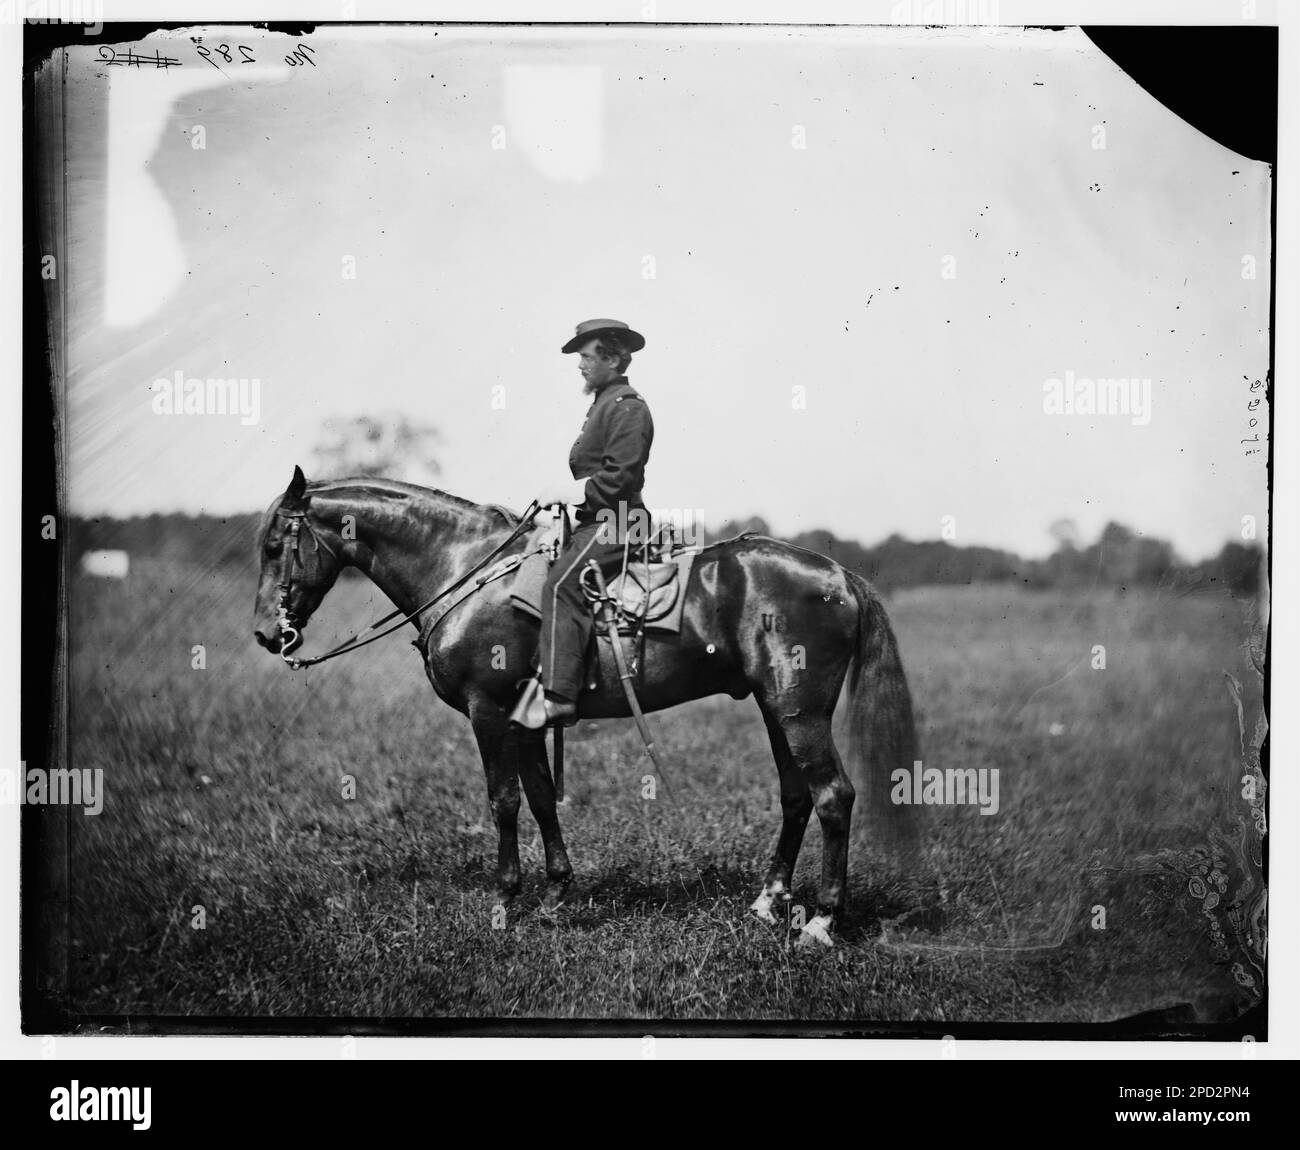 Bealeton, Virginia. Captain Henry Page, assistant quartermaster, at Army of the Potomac headquarters. Civil war photographs, 1861-1865 . United States, History, Civil War, 1861-1865. Stock Photo